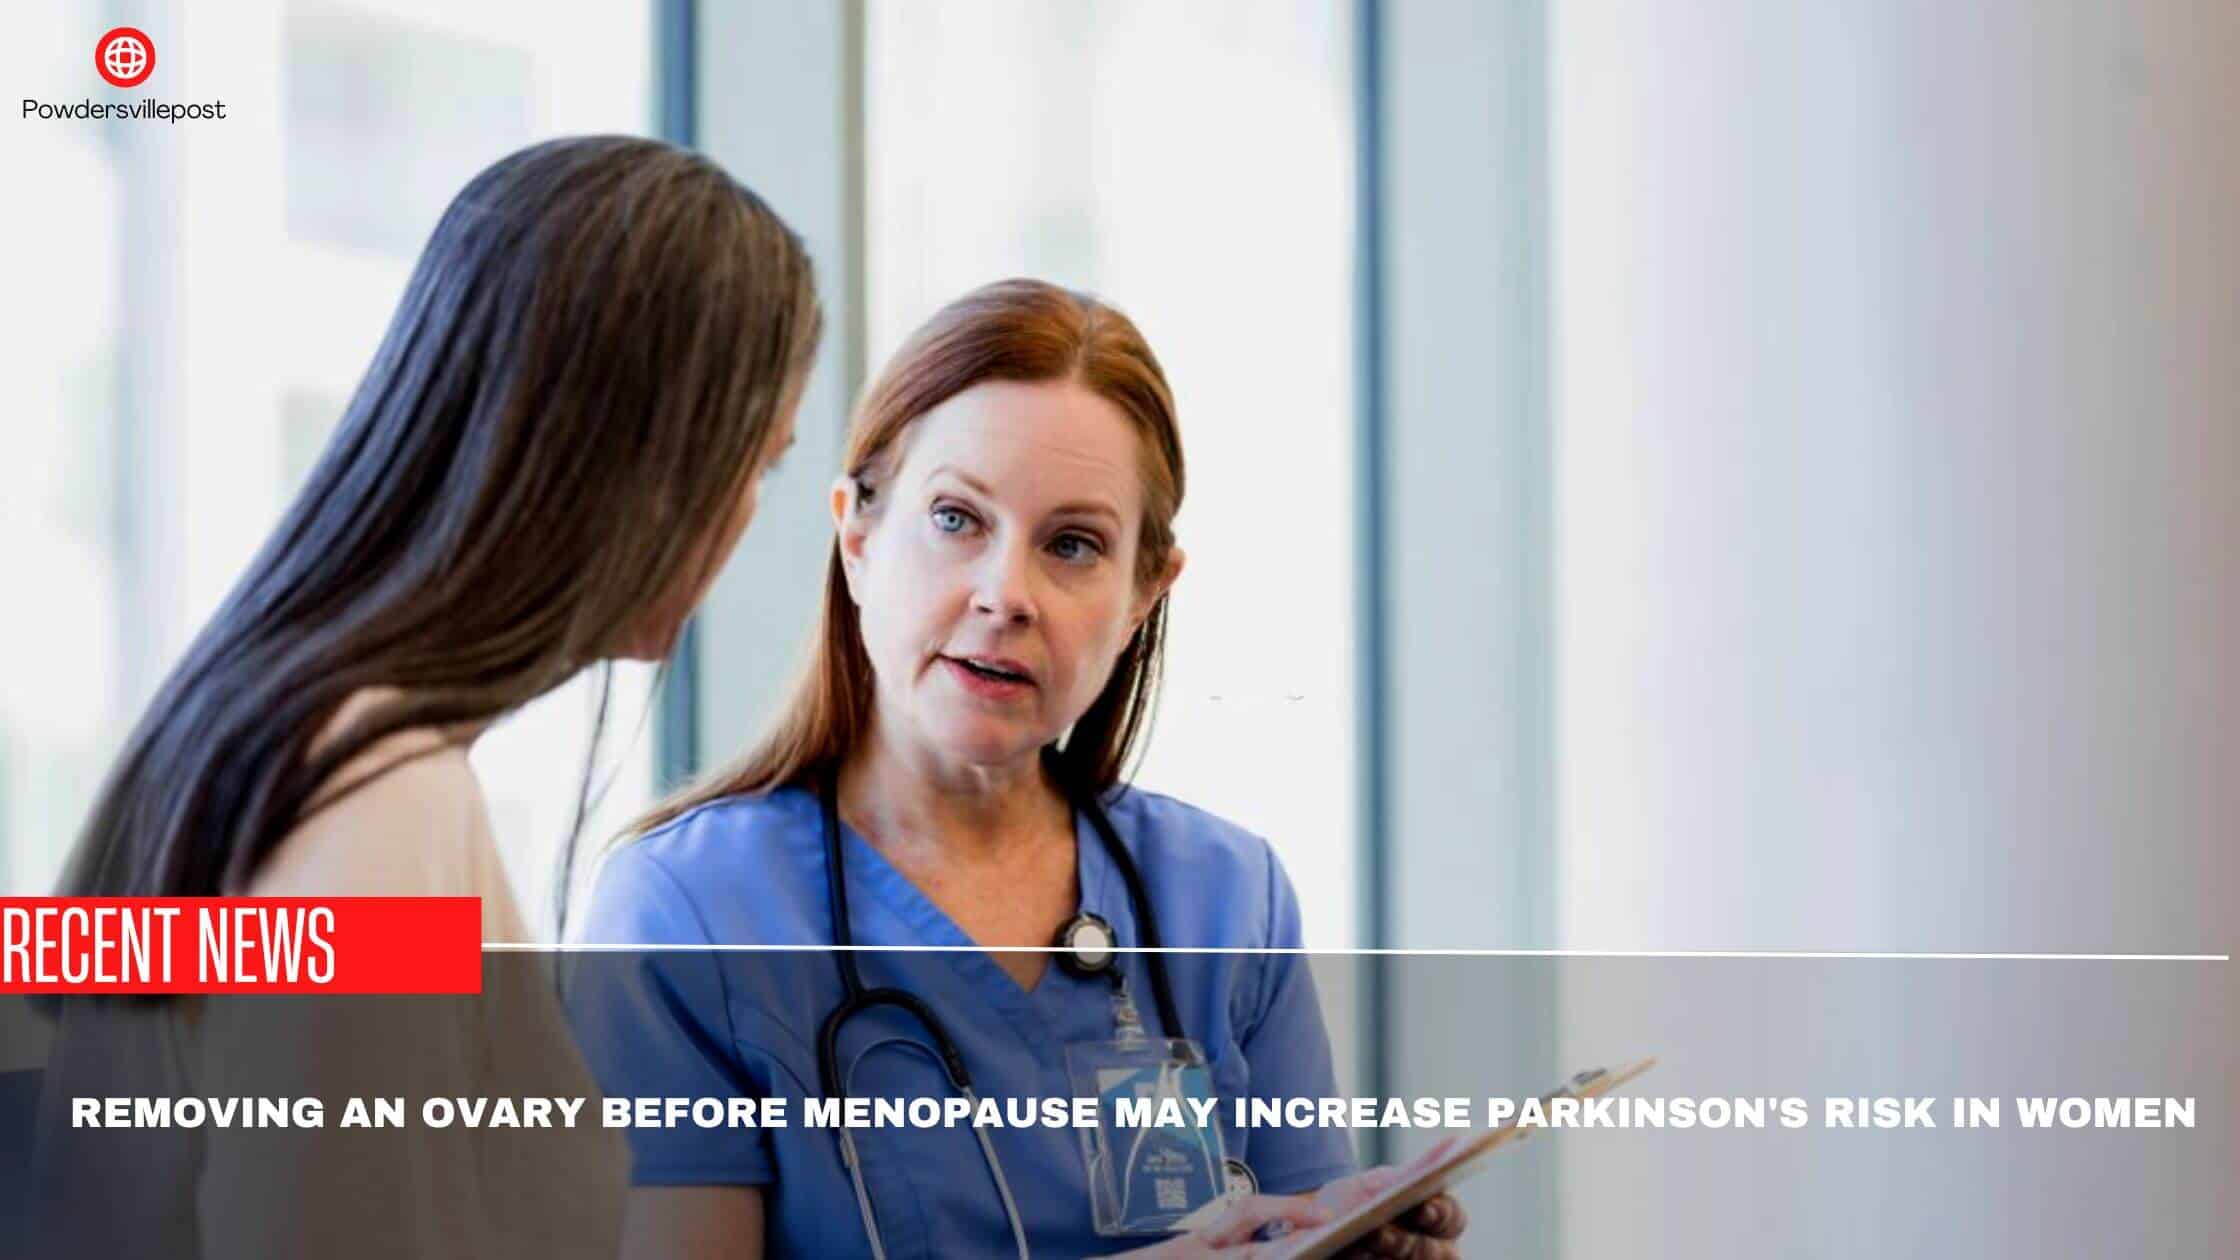 Removing An Ovary Before Menopause May Increase Parkinson's Risk In Women